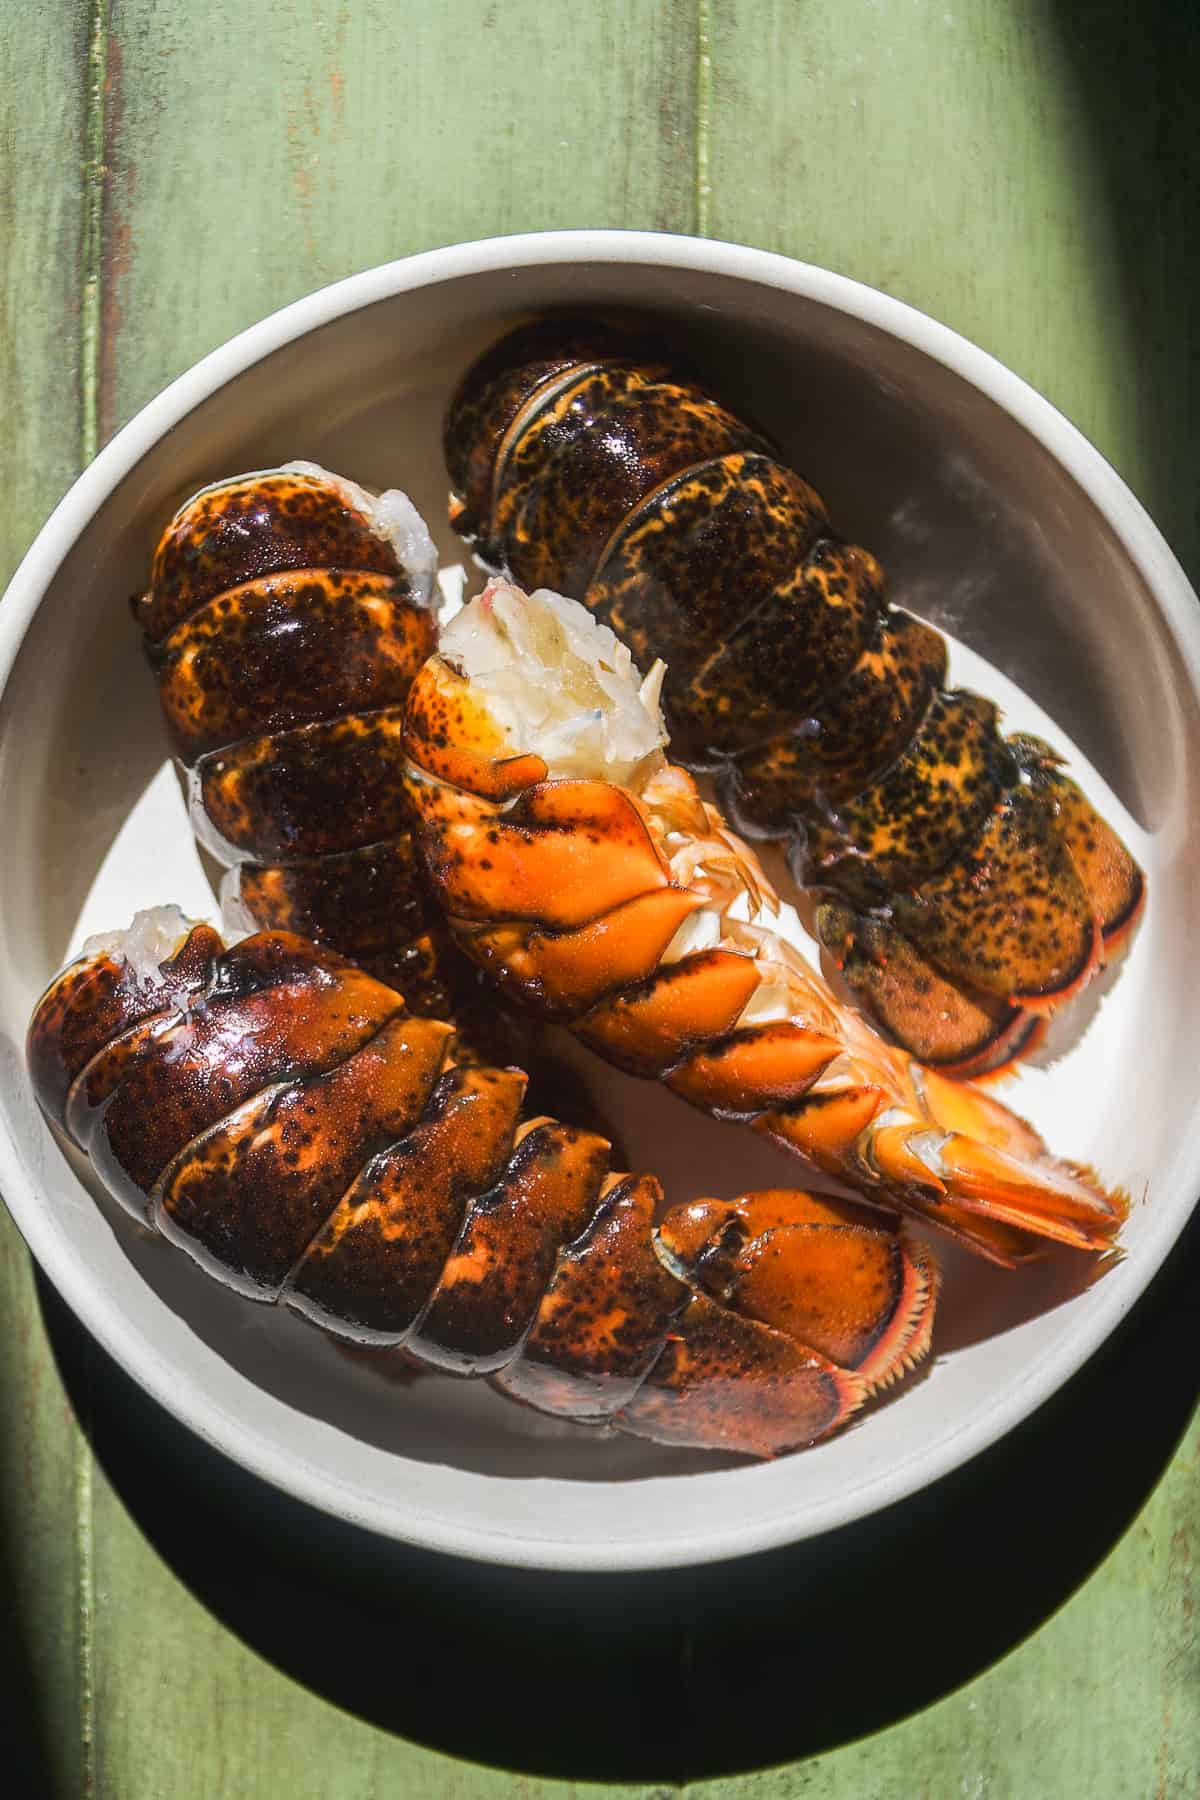 Lobster tails in the shells in a bowl.